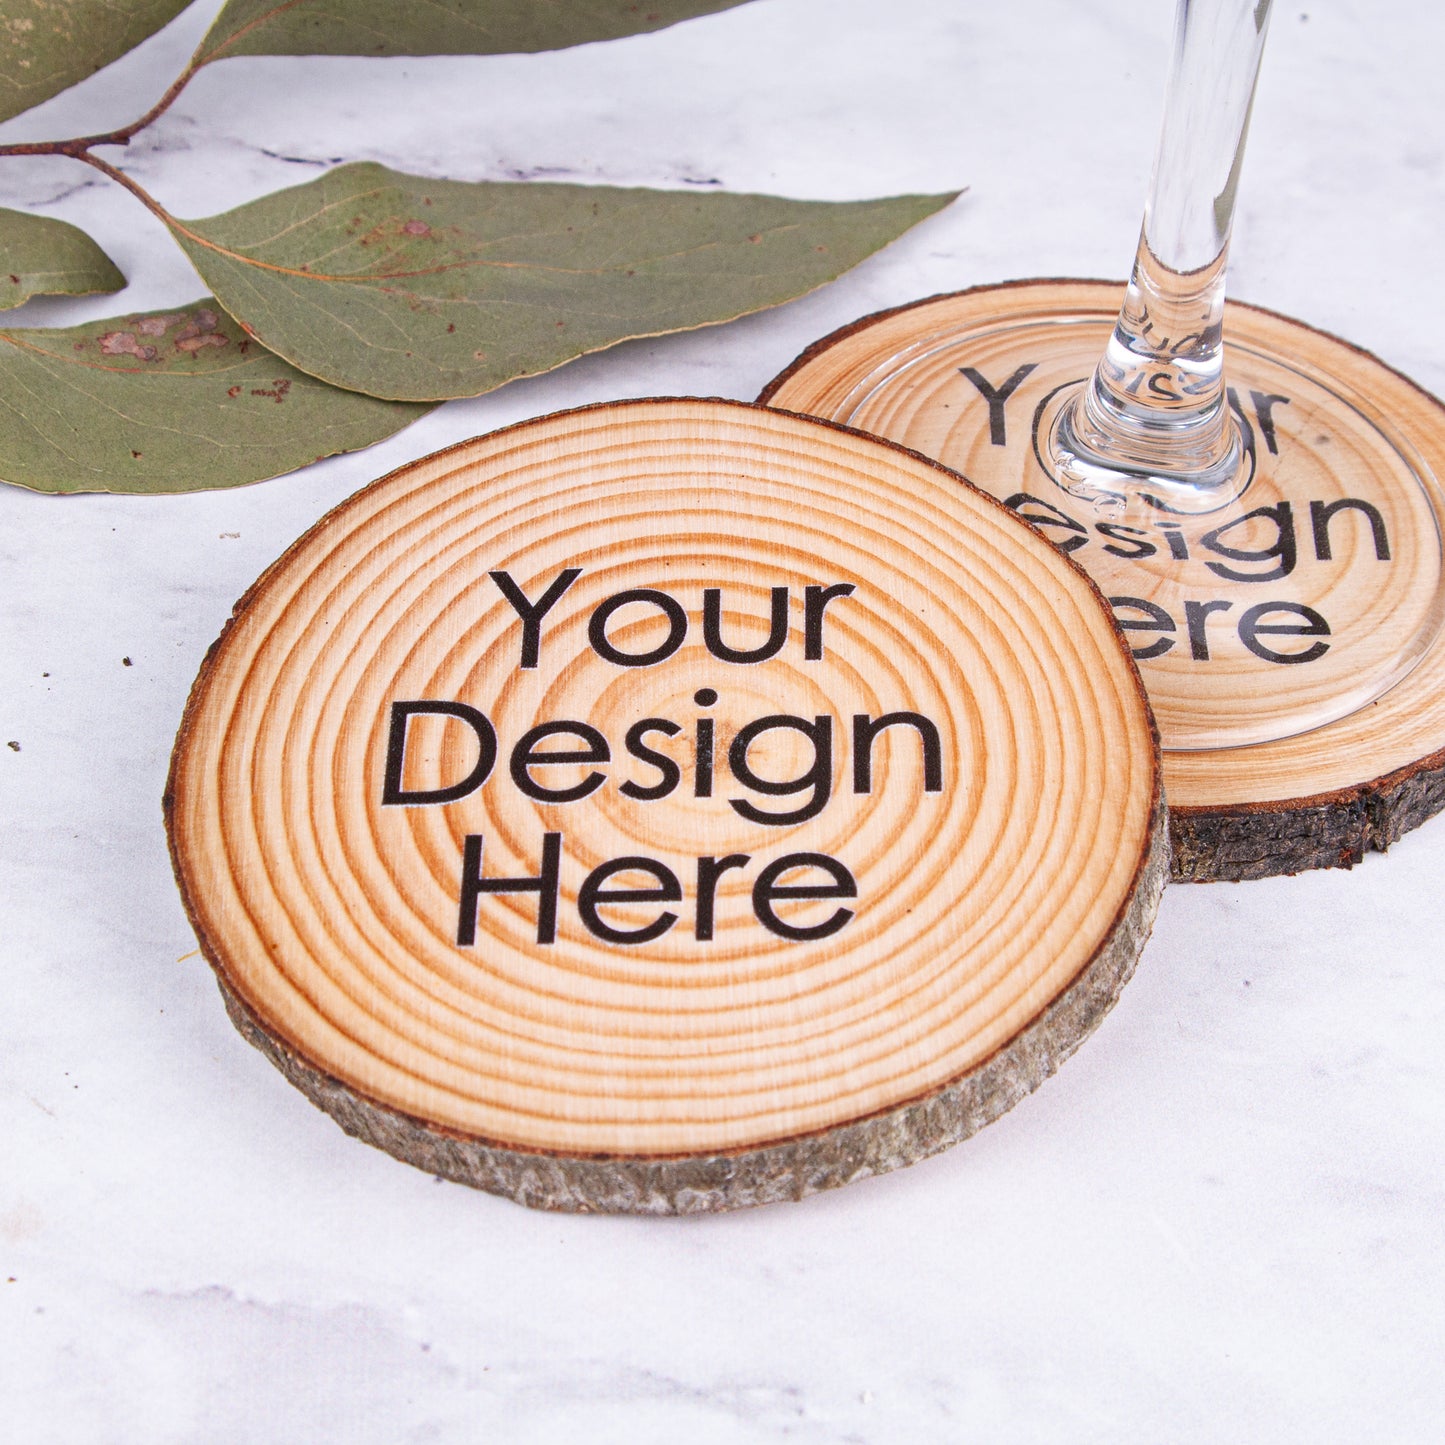 Coasters - Bring your own Design